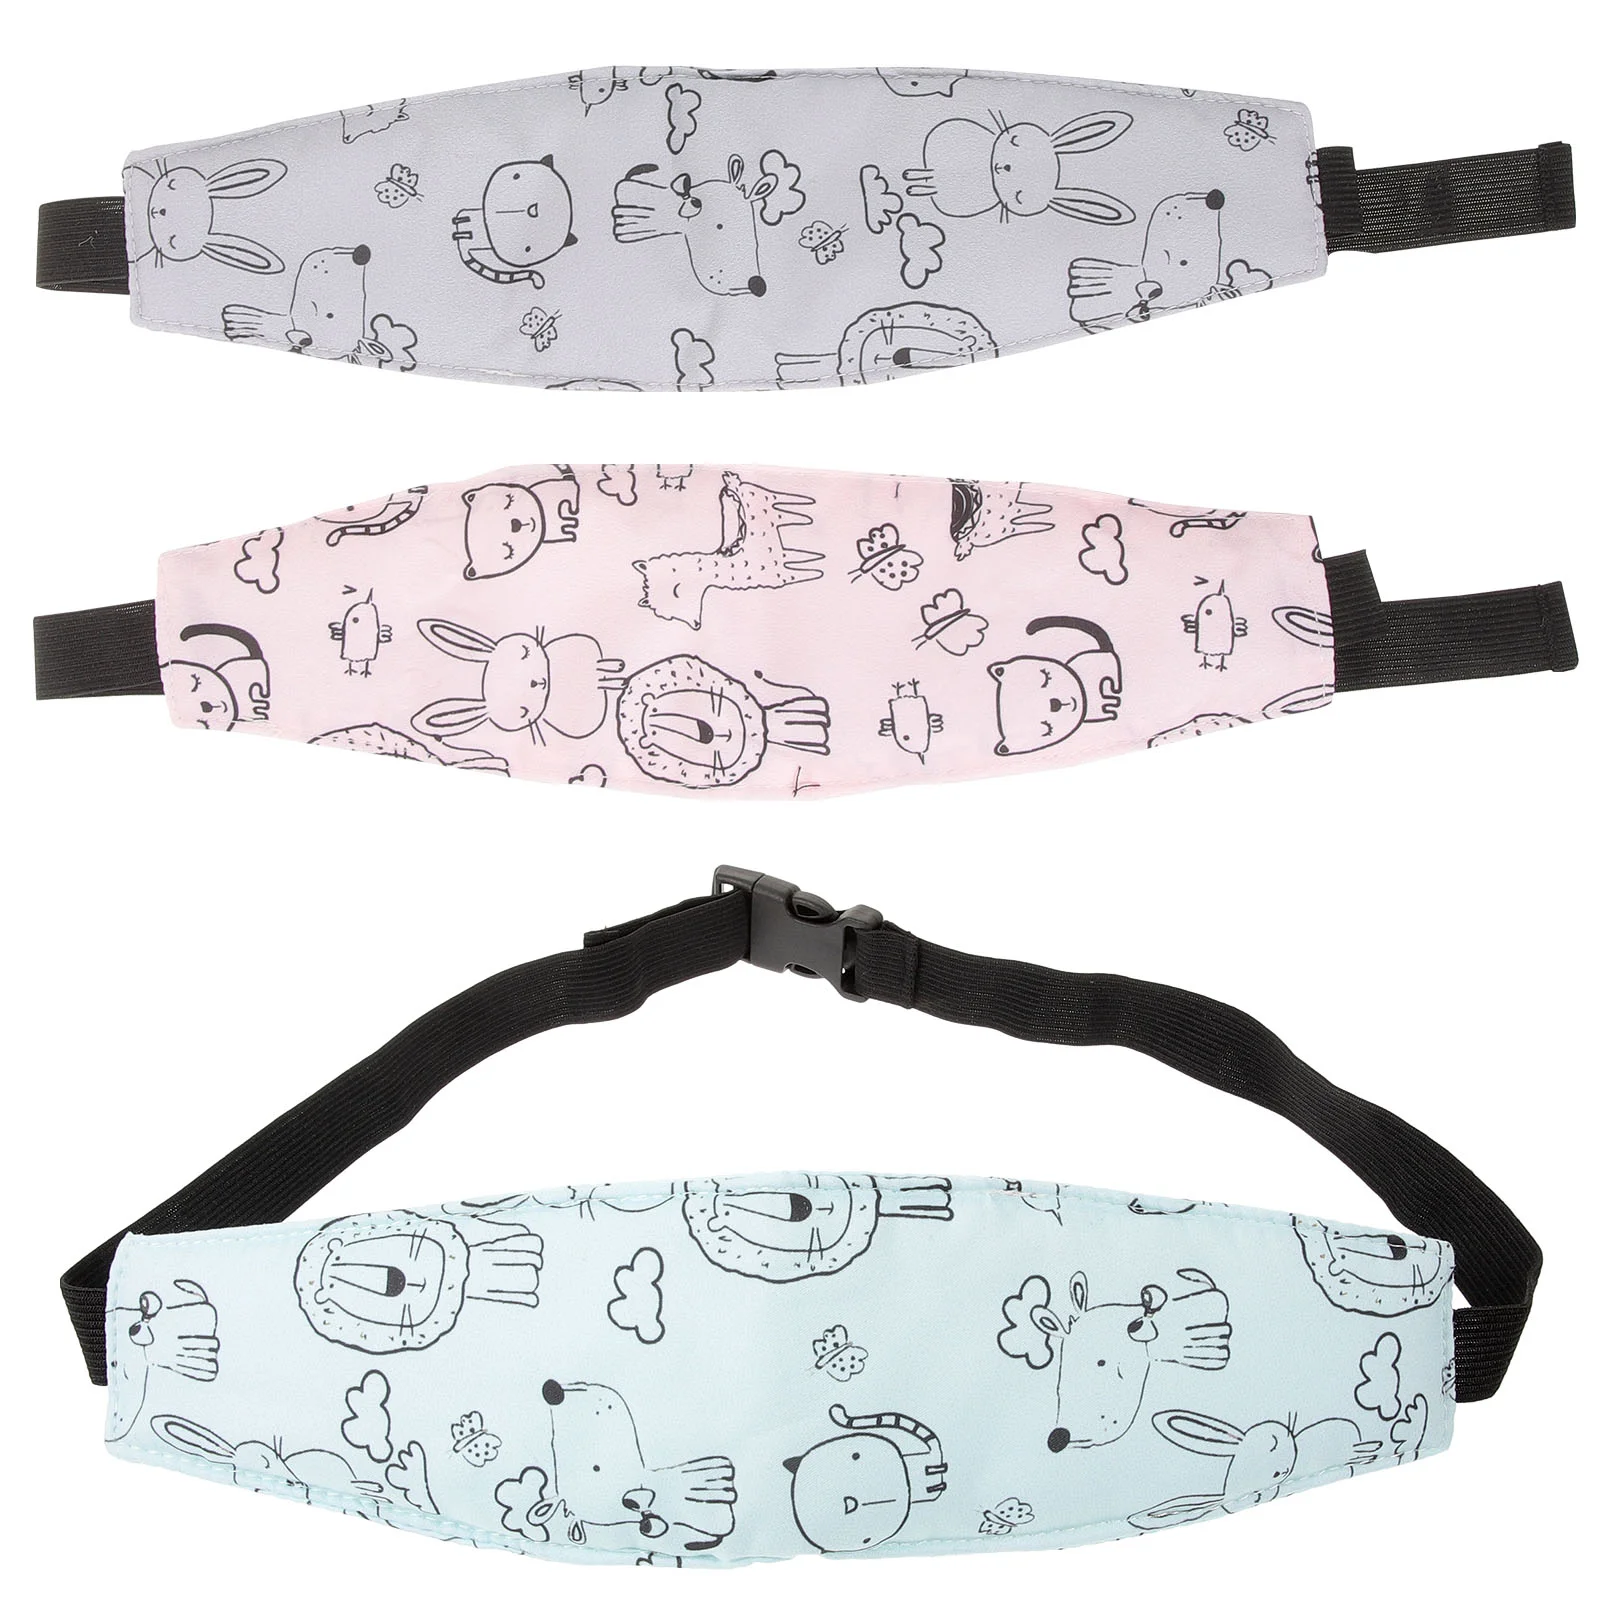 3Pcs Head Support for Stroller Car Seat Head Support Safety Seat Baby Headrest Trolley Kids Head Band protect baby head support holder cute print comfortable sleep belt adjustable safety car seat kids nap aid band carriers